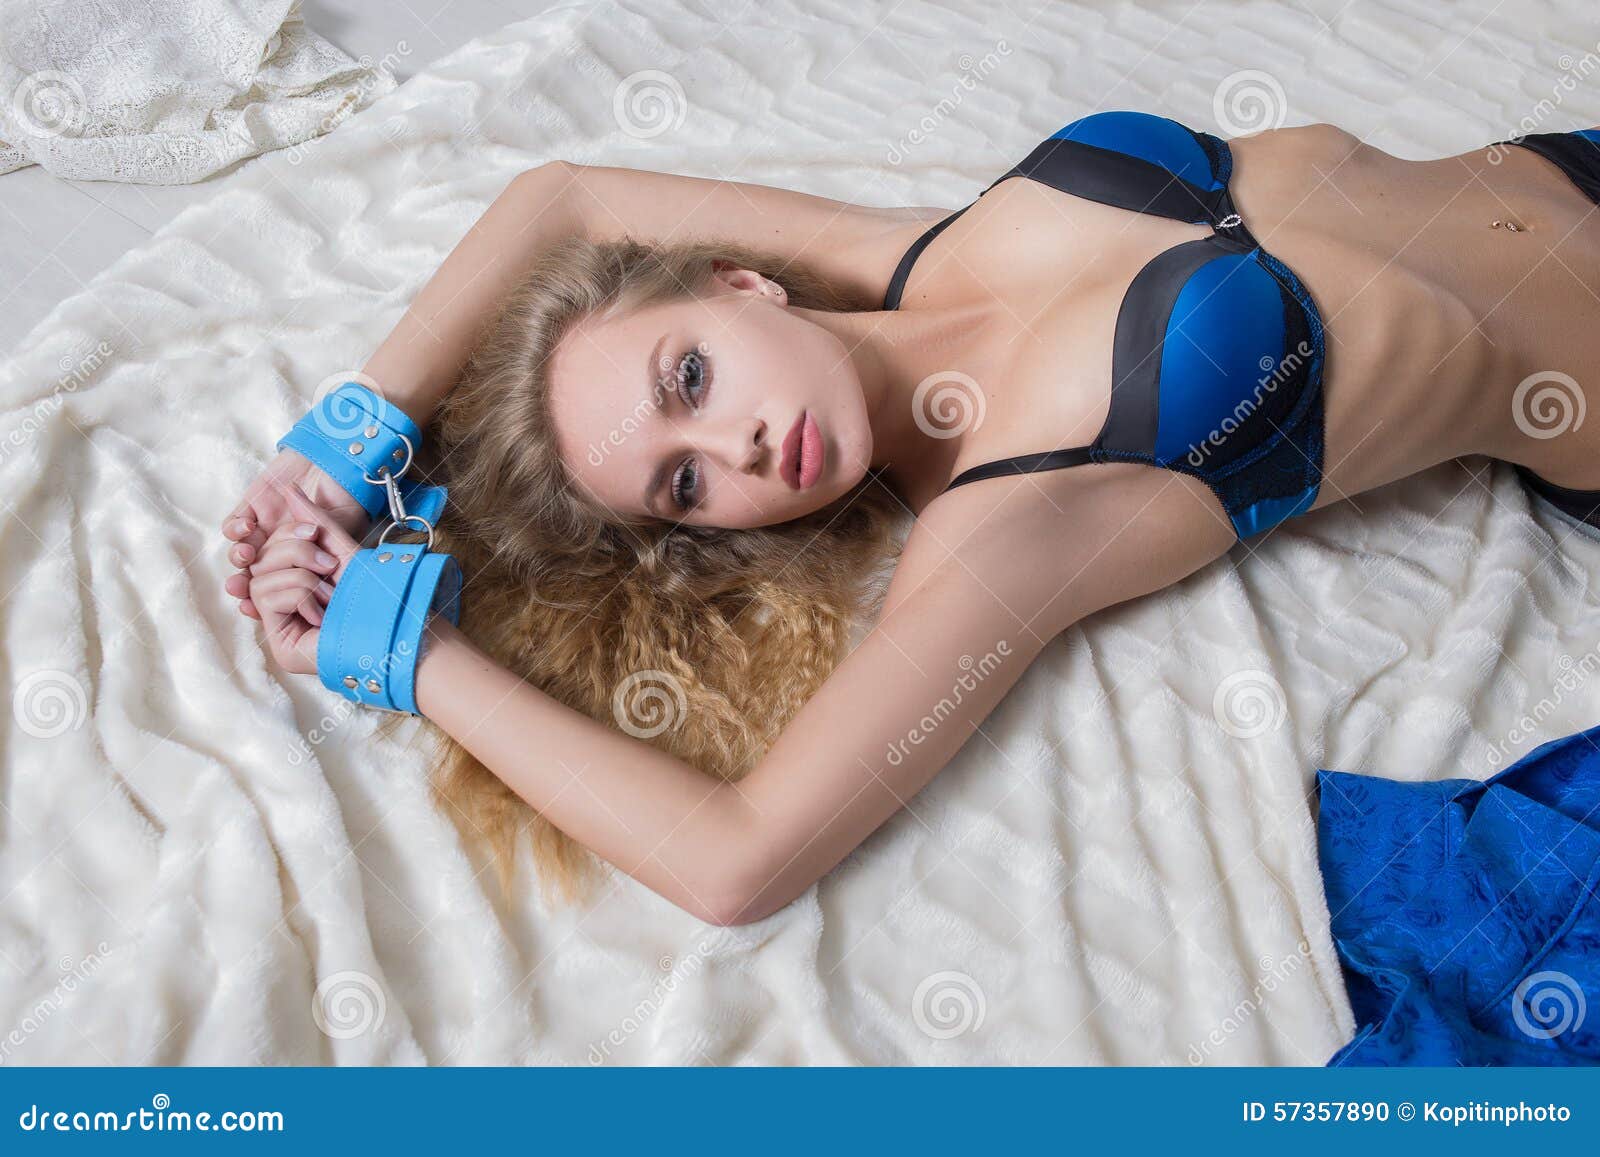 Hot Naked Blond with Handcuffs Stock Photo